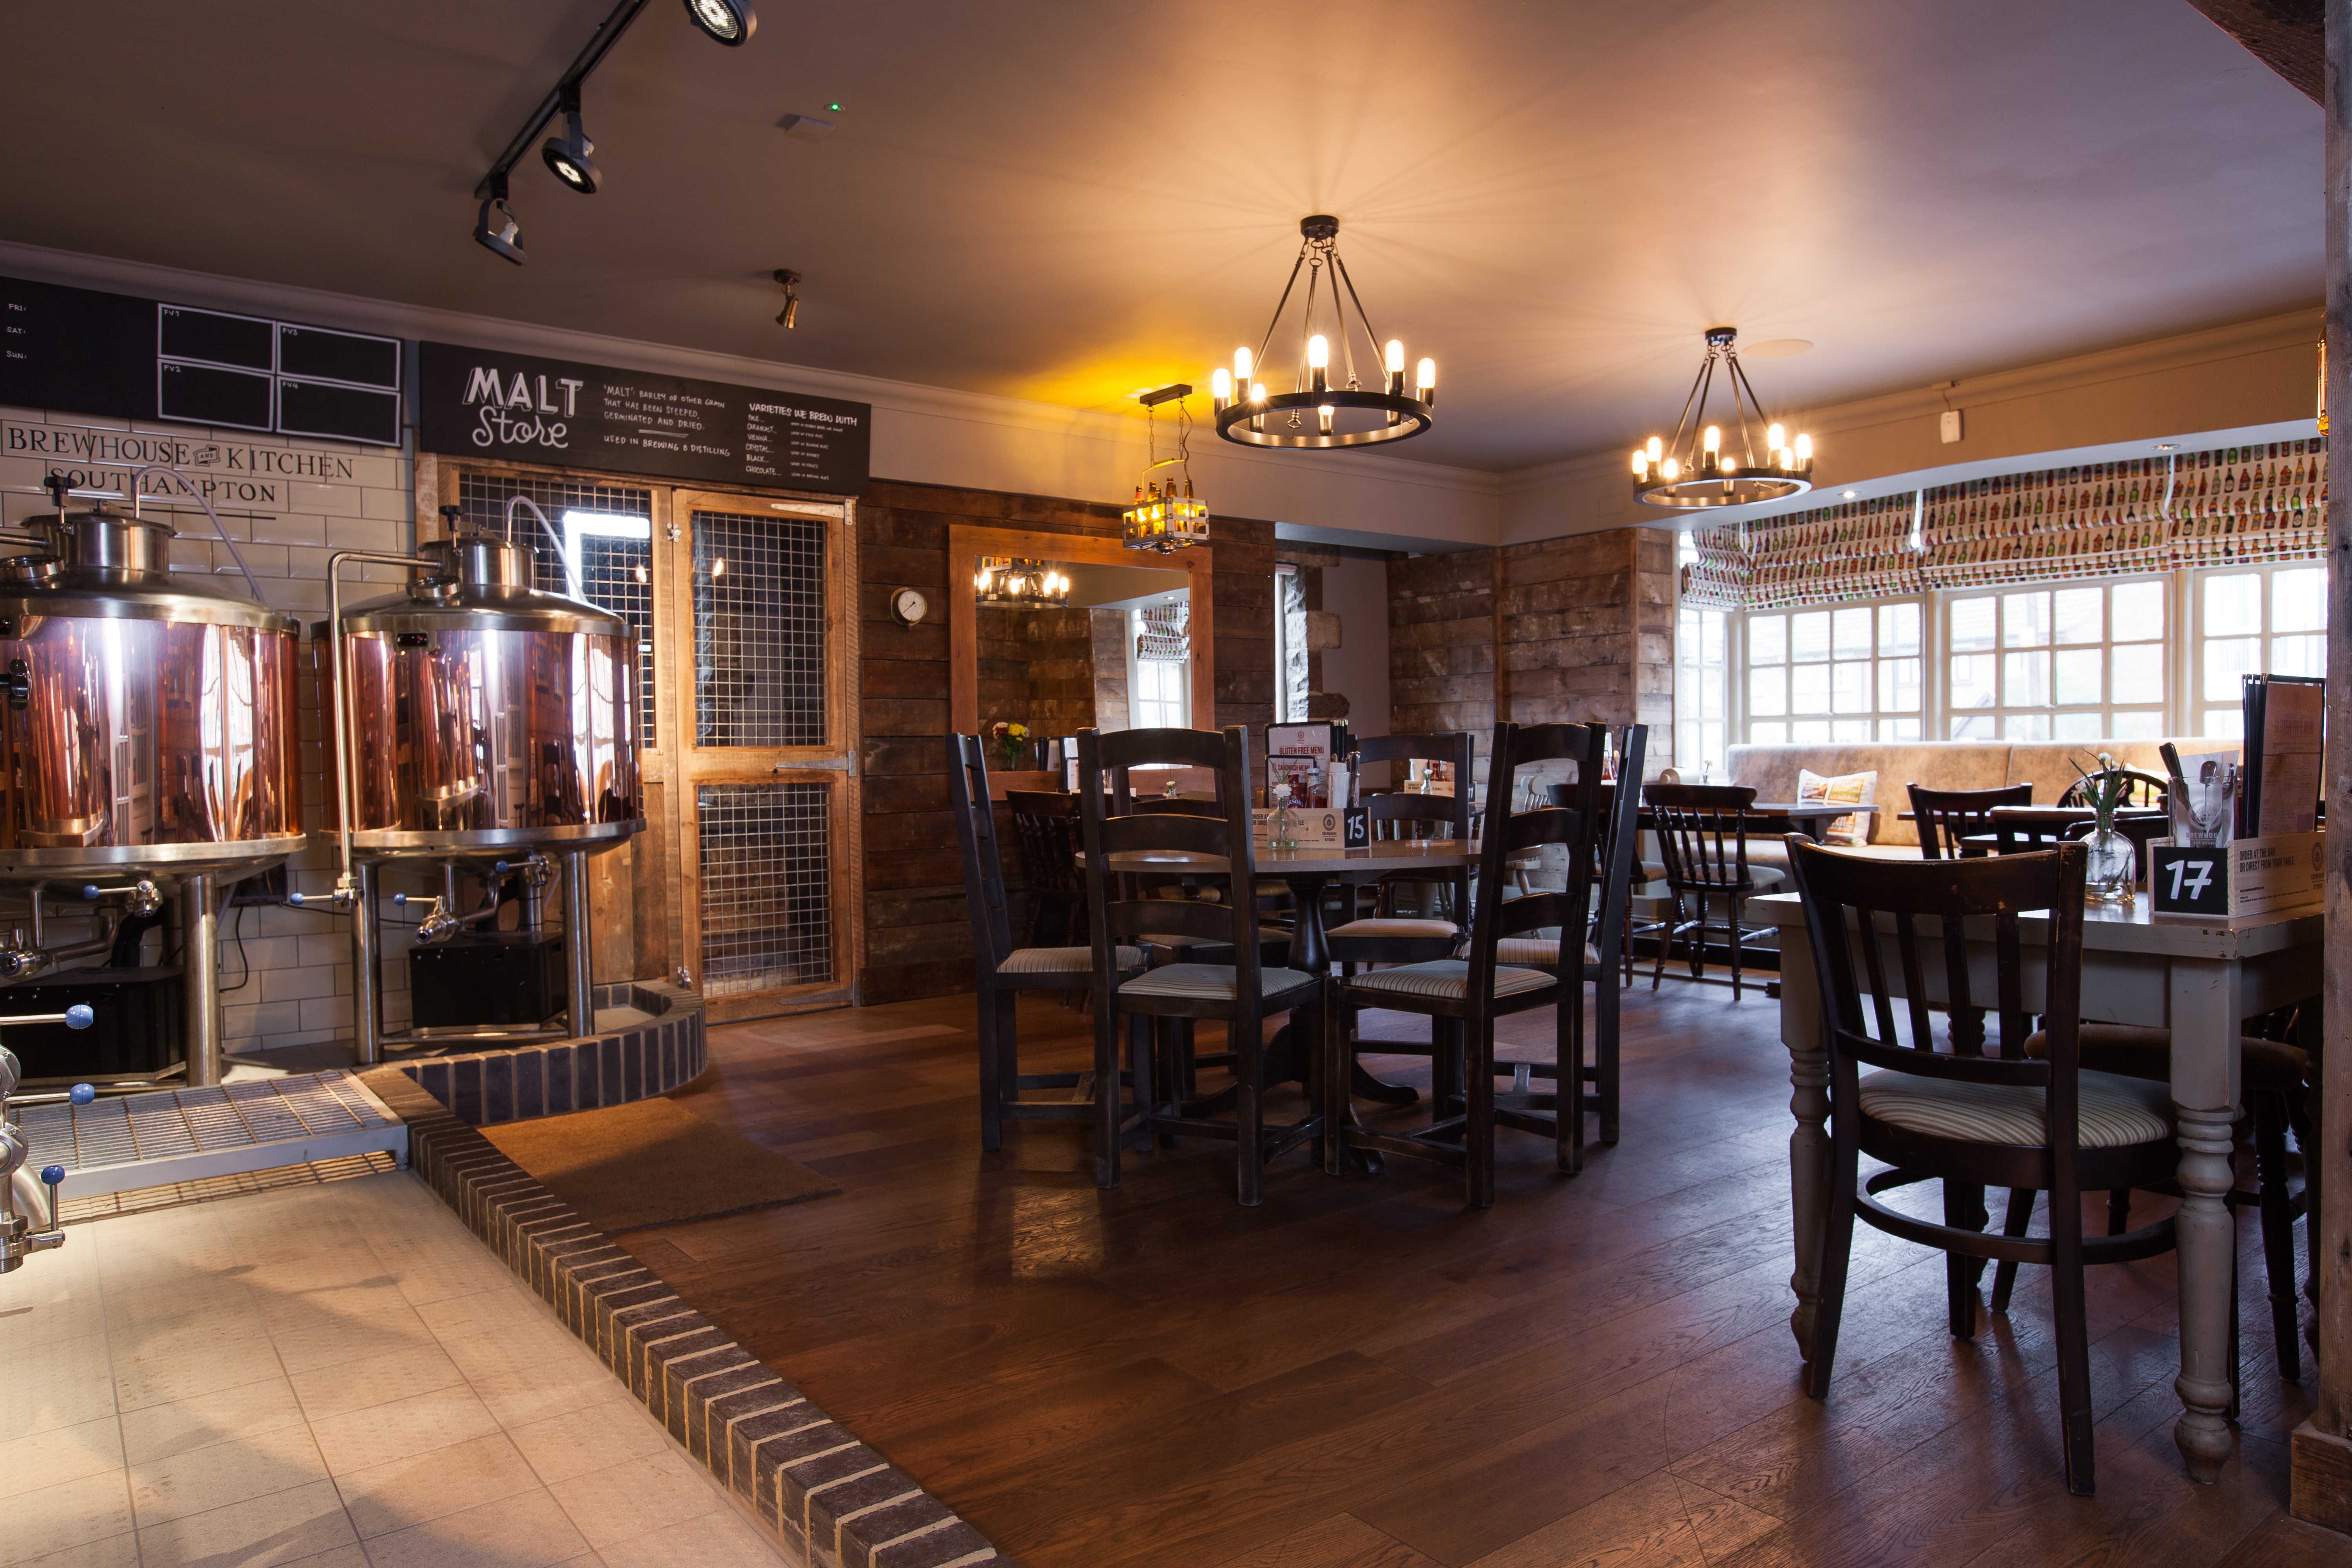 The Brewery Room at Brewhouse & Kitchen Southampton